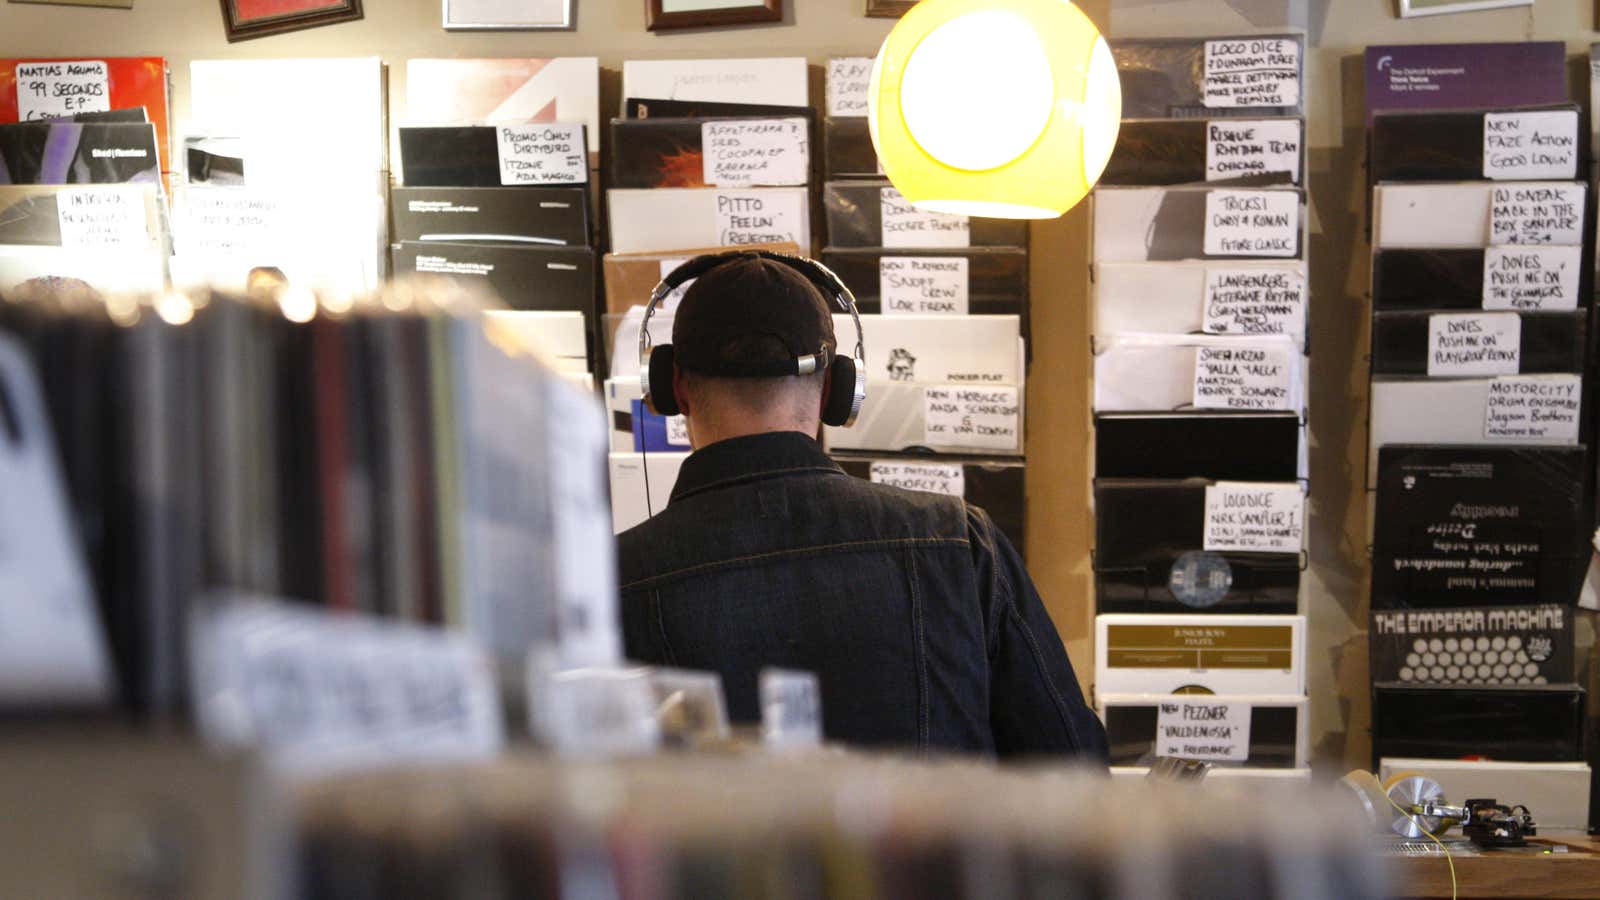 A man listens to music in the Phonica record store on Record Store Day, in central London April 18, 2009. The day aimed to celebrate…